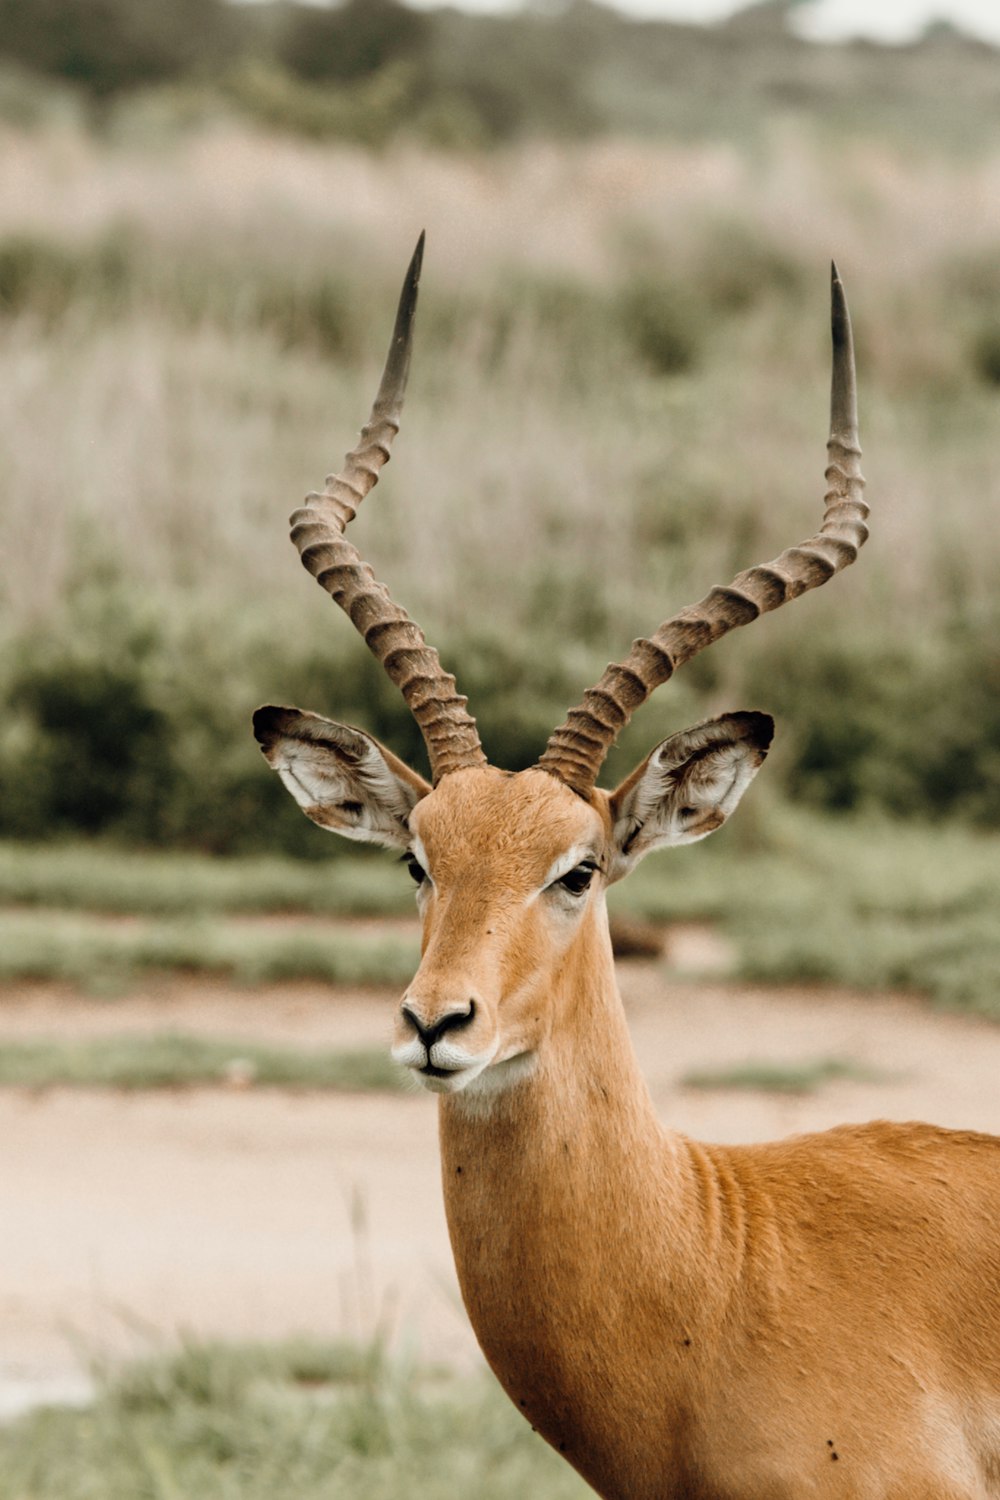 a gazelle with long horns standing in a field